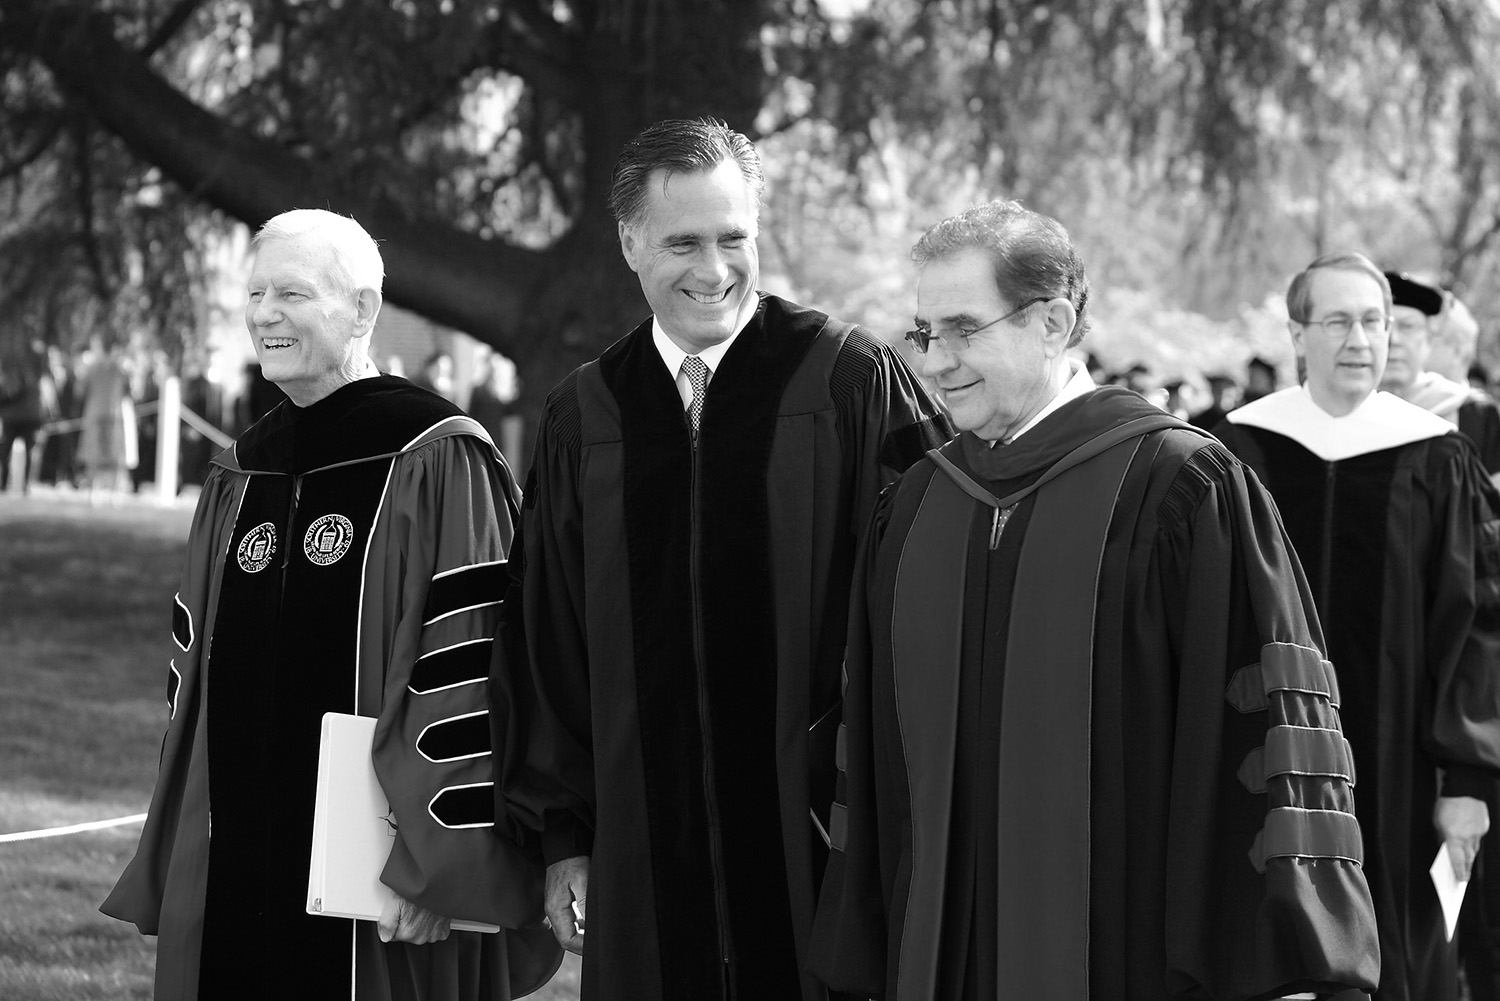 Governor Mitt Romney walking with President Wilcox and